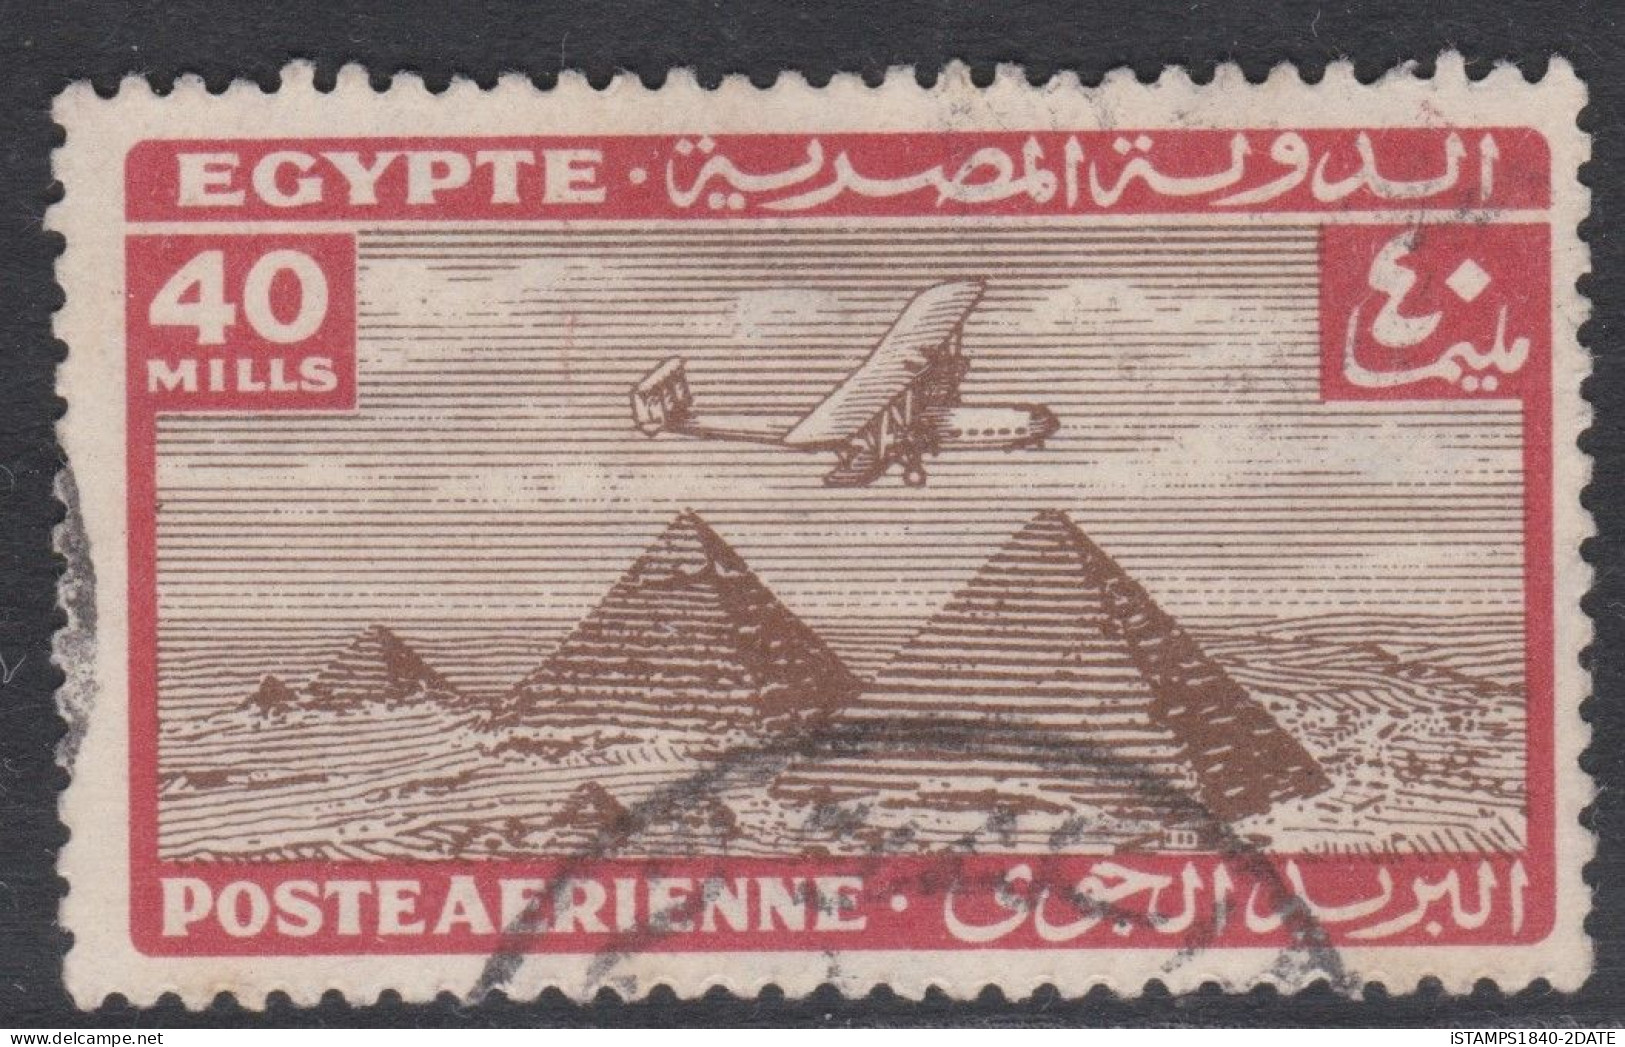 00679/ Egypt 1934/38 Air Mail 40m Used Plane Over Pyramid - Luftpost